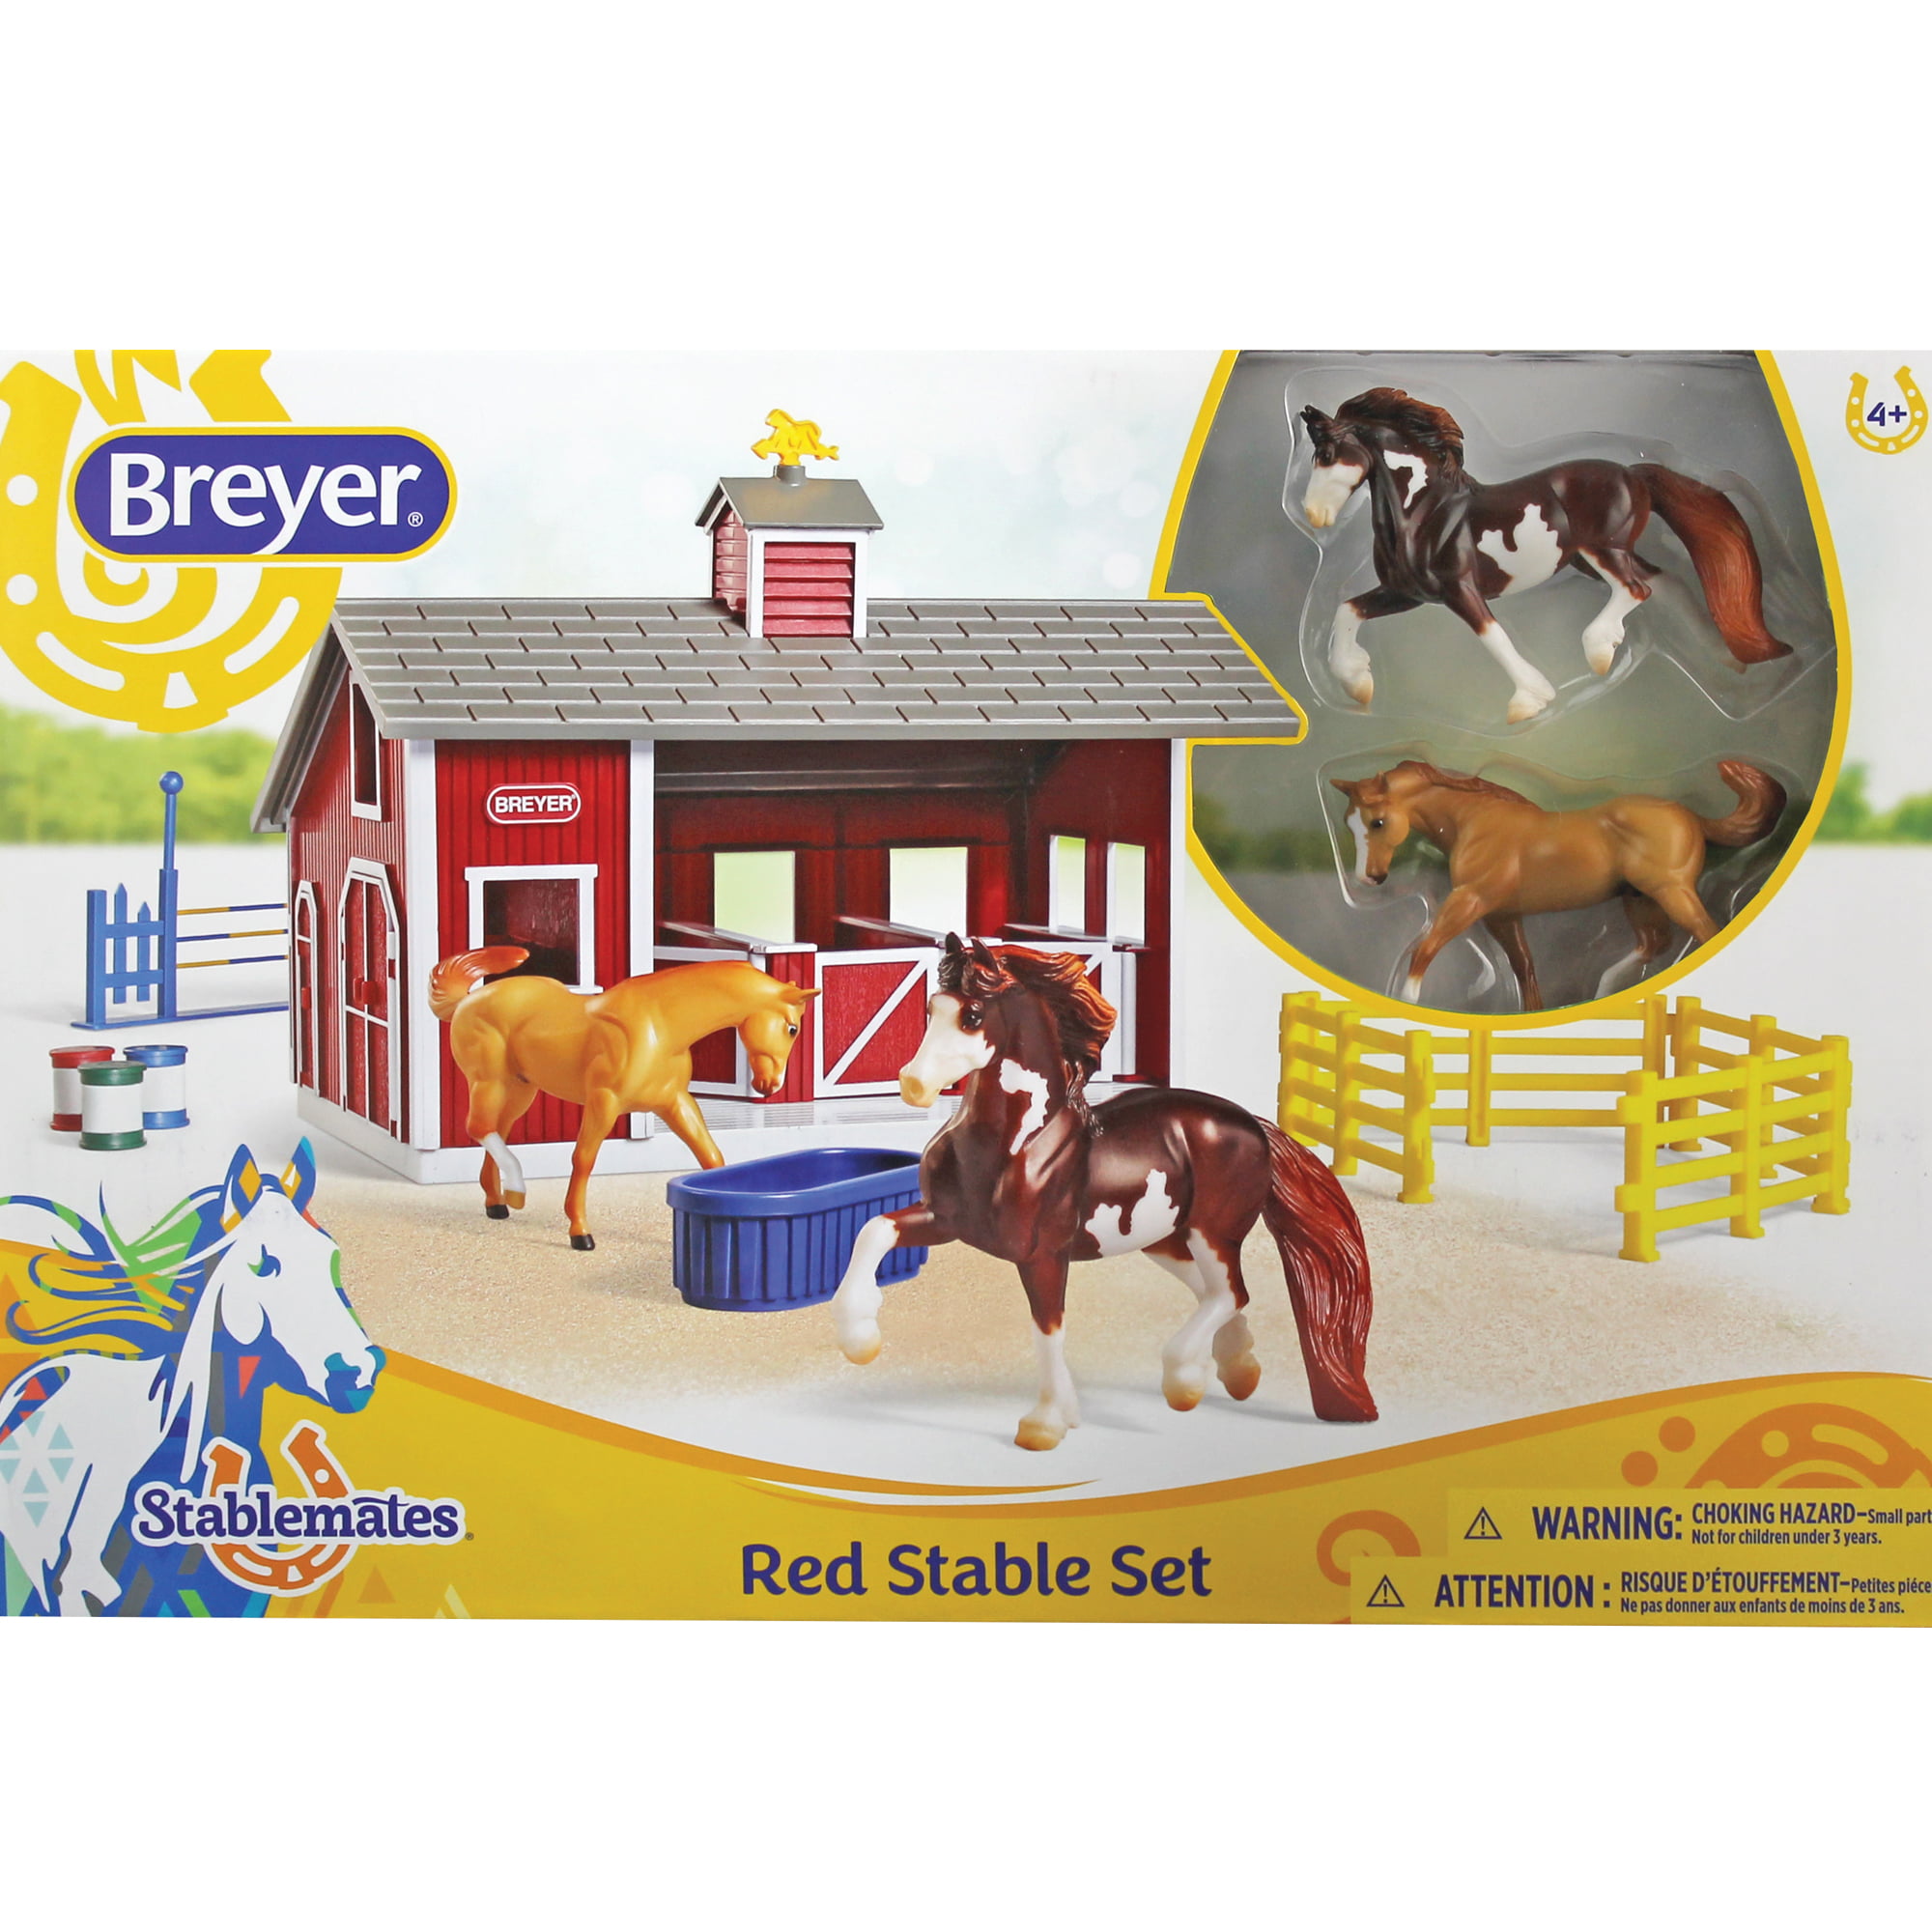 Breyer Stablemates Glow in the Dark Horses 4pc Stable Farm Ranch 5396 1:32 